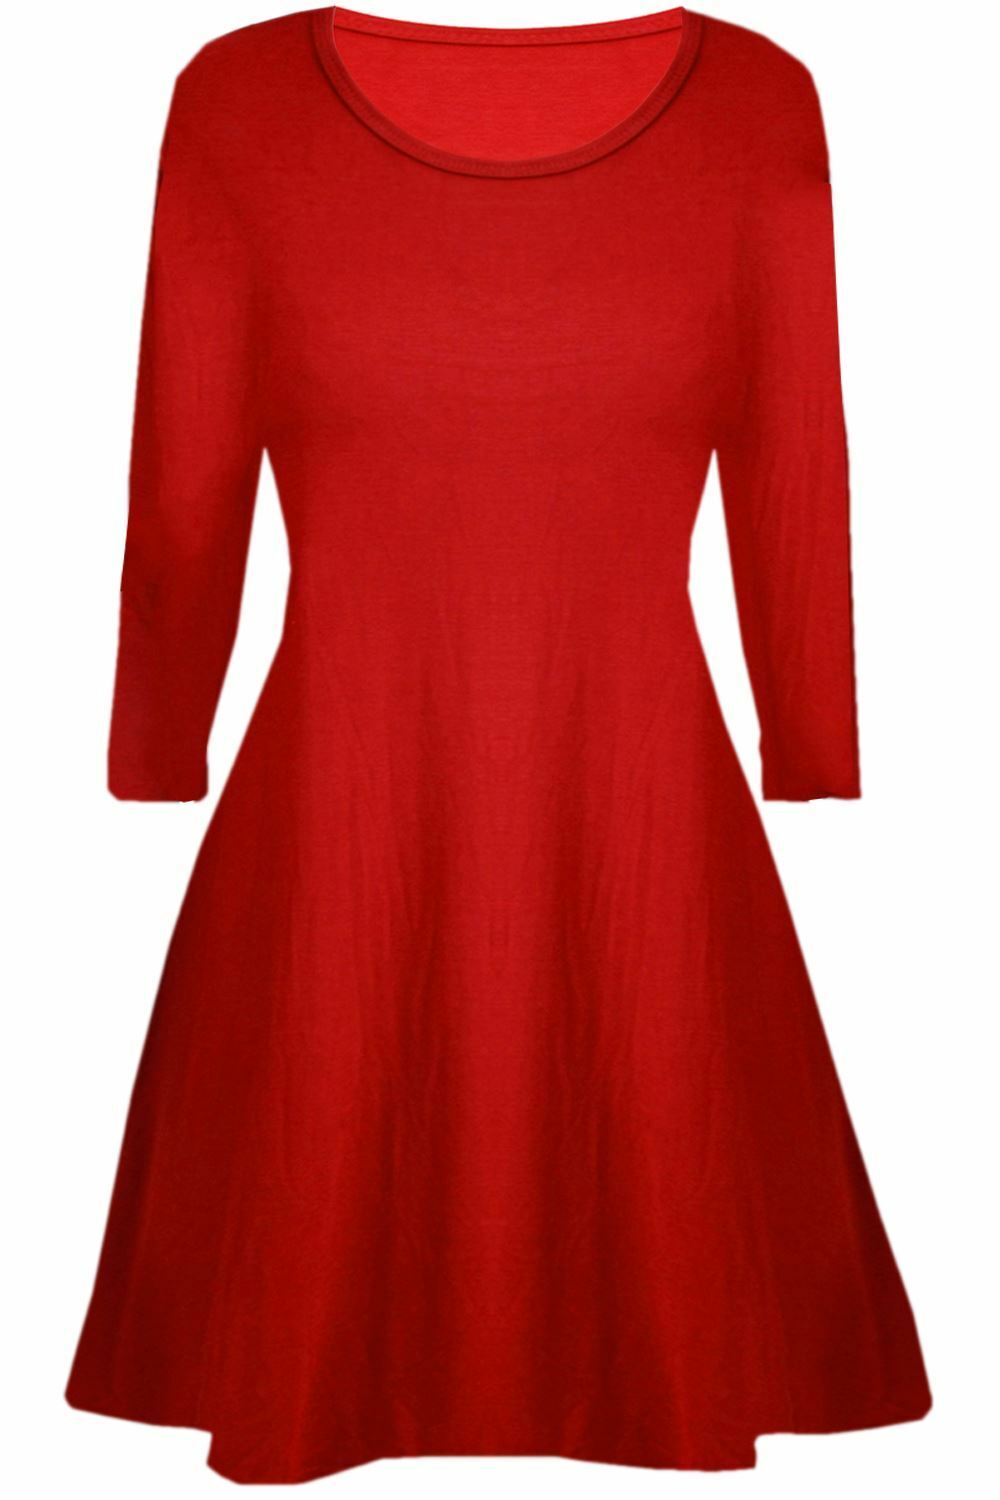 Children's Long Sleeve Red Skater Dress Age 5 To 13, 100% Polyester